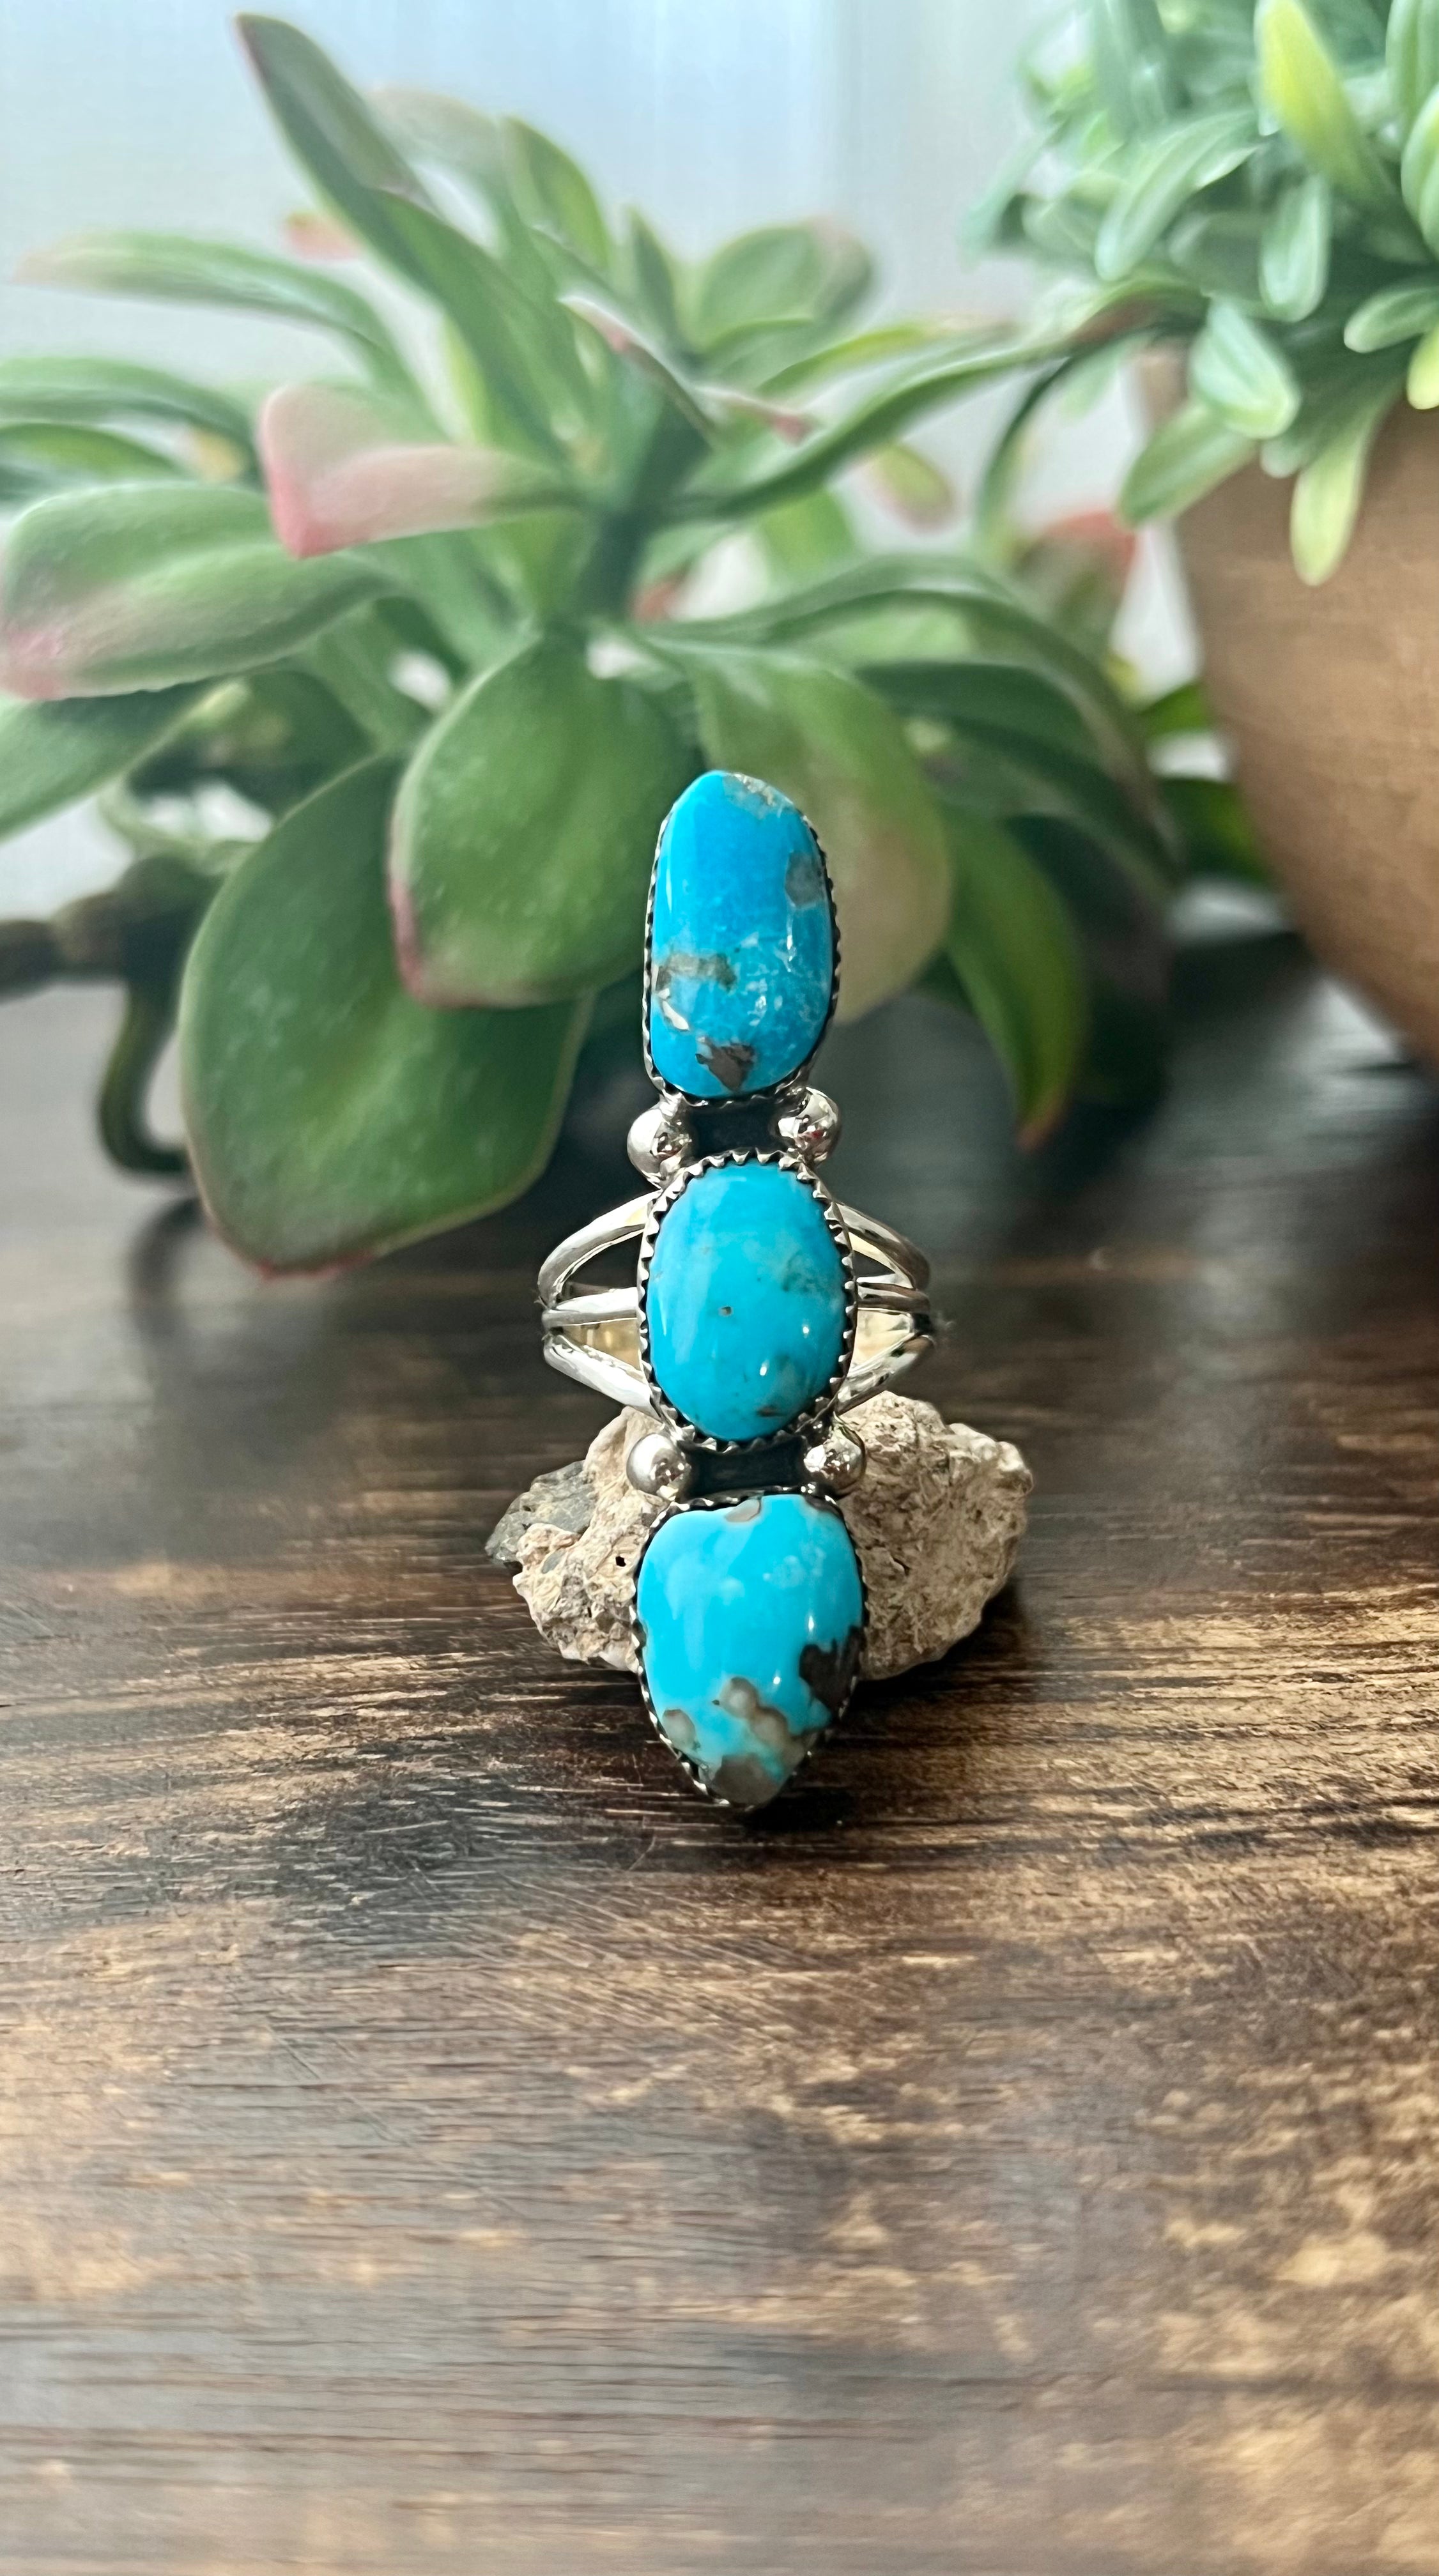 Southwest Handmade Kingman Turquoise & Sterling Silver Climber Ring Size 6.5 Stamped Sterling